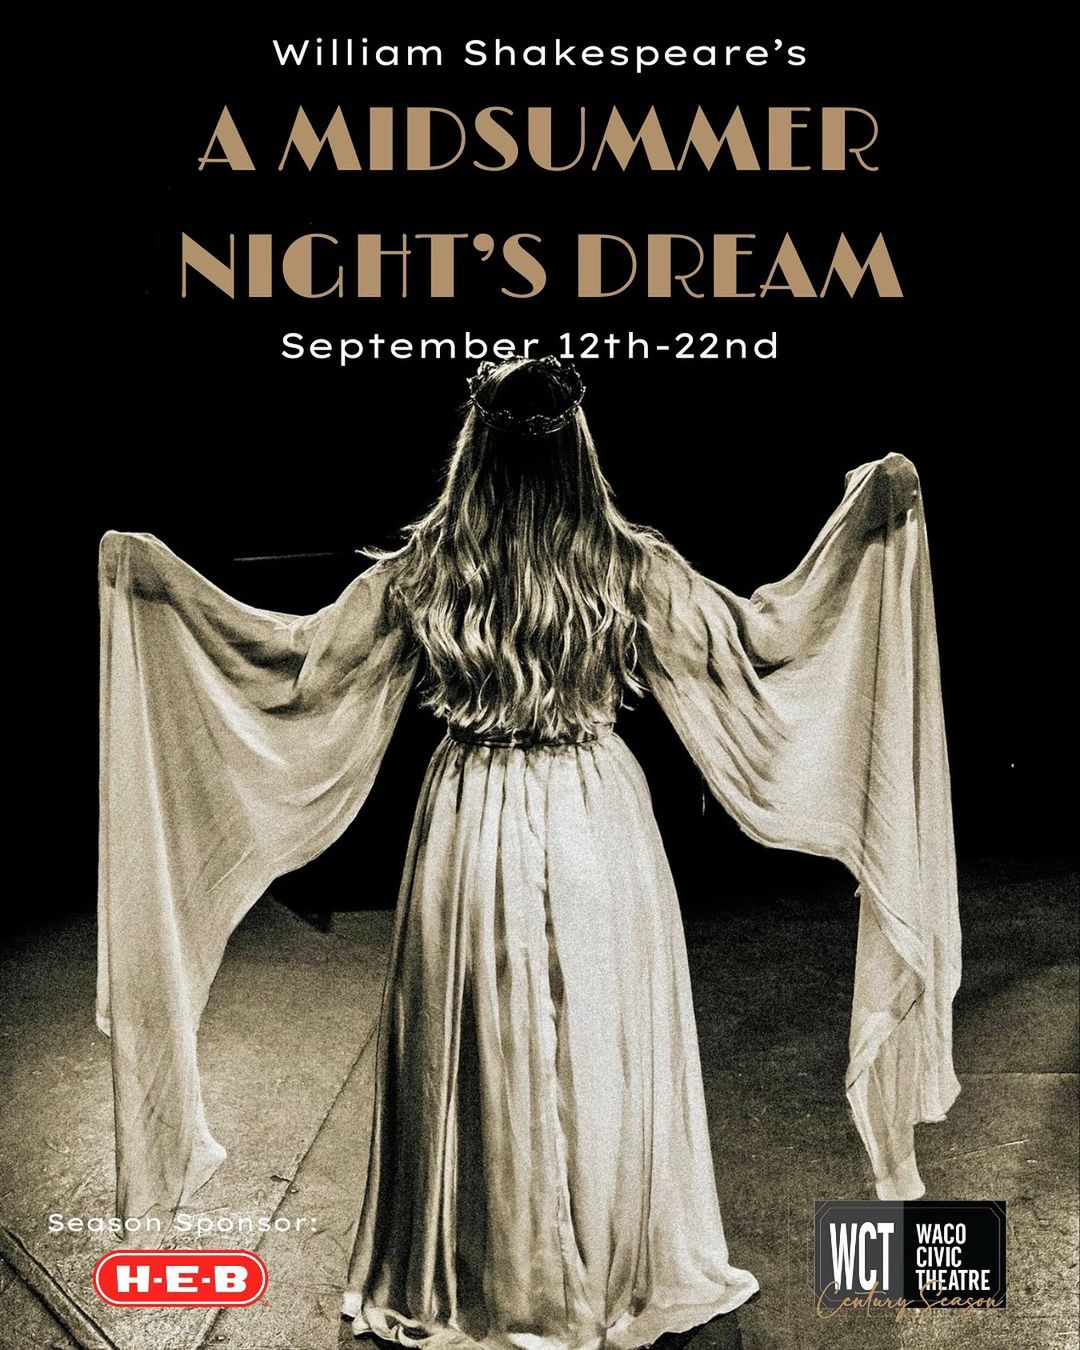 CTX3757. Auditions for A Midsummer Night's Dream, by Waco Civic Theatre